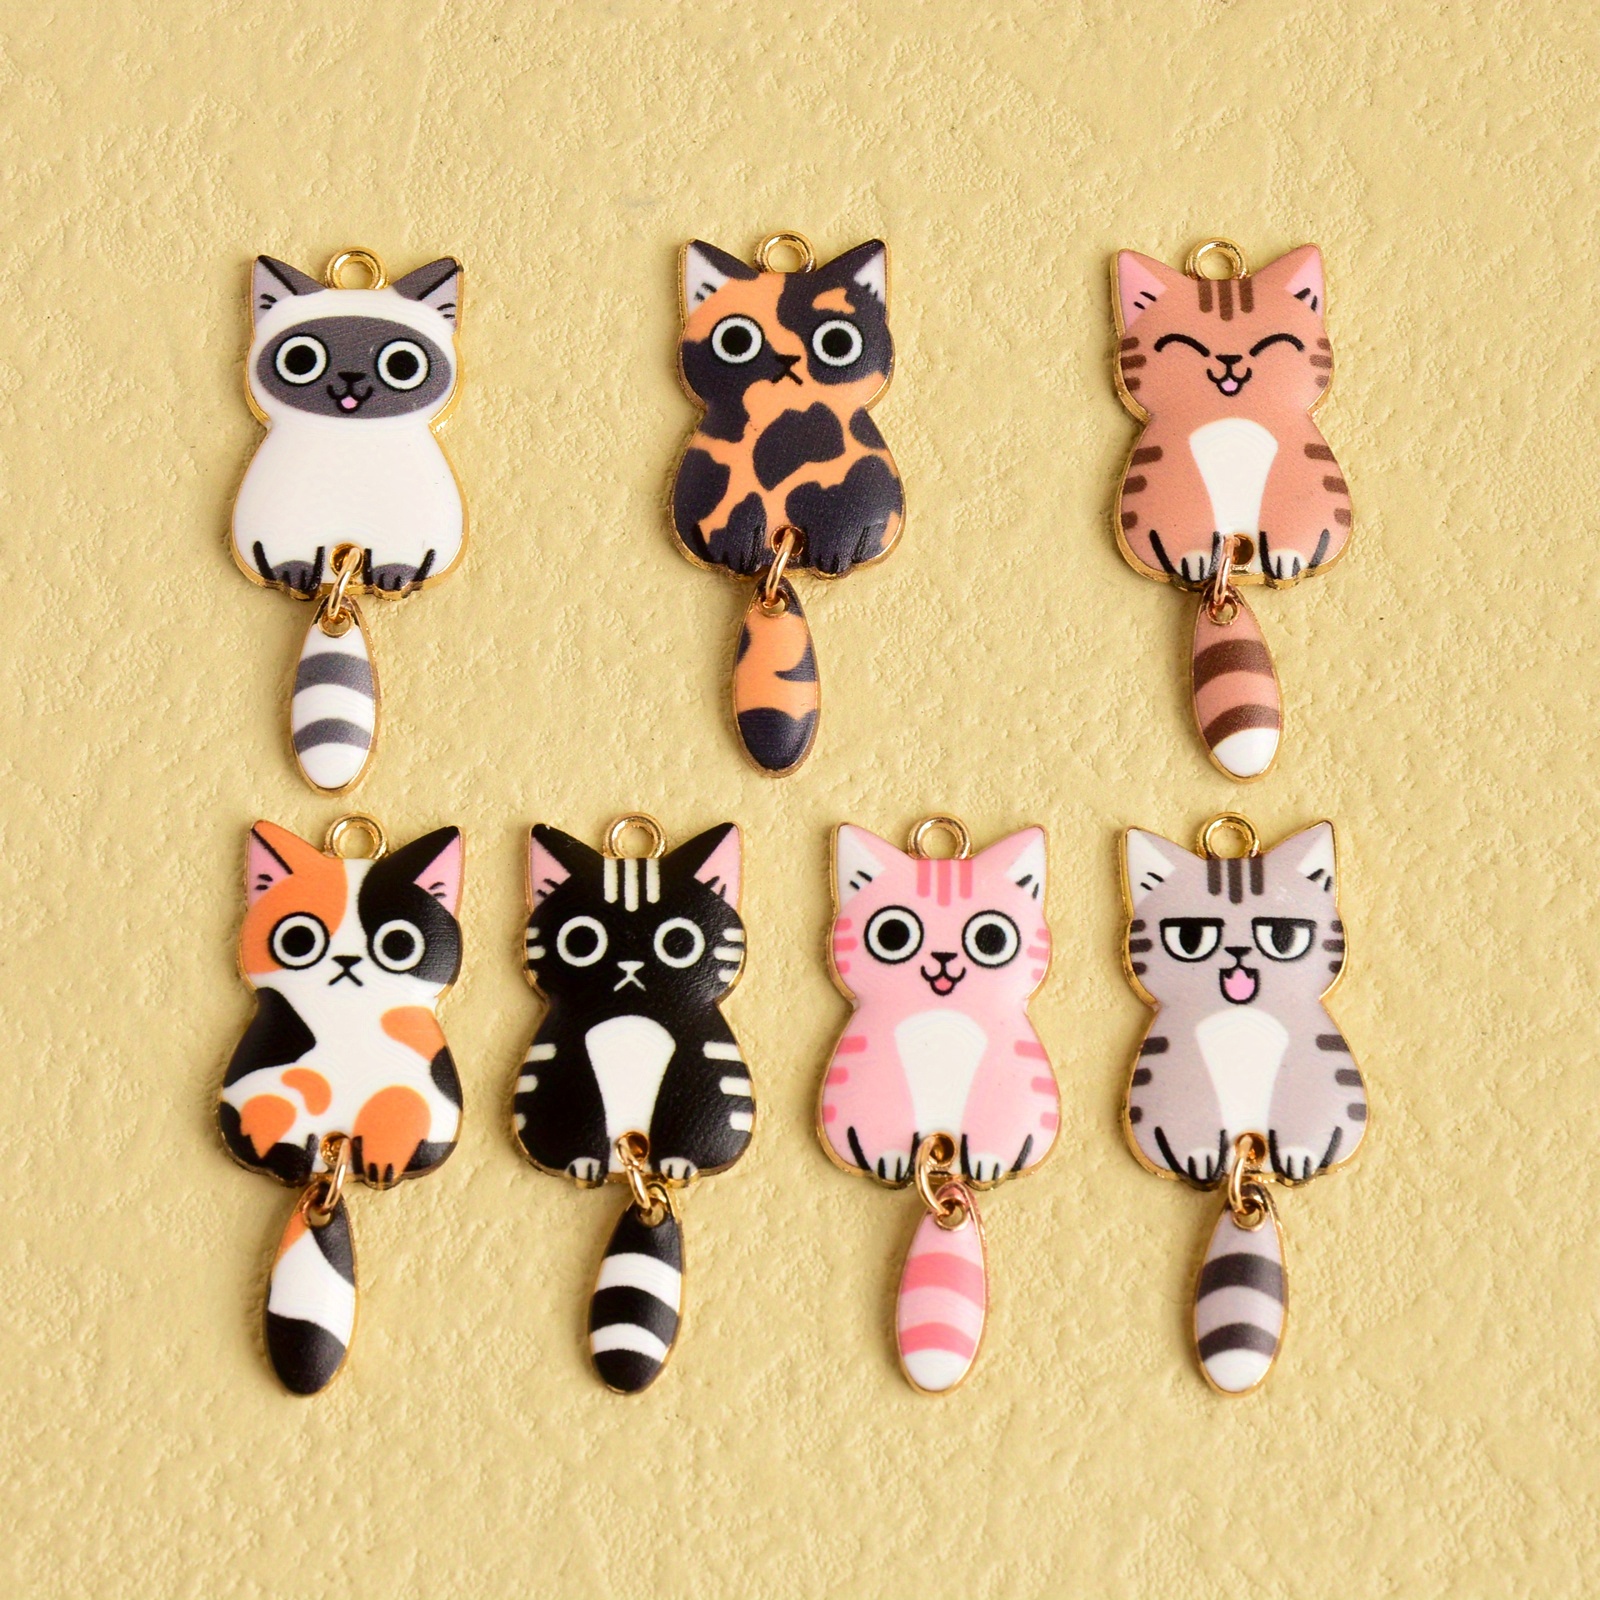 Wholesale SUNNYCLUE 1 Box 24Pcs 12 Style Colorful Cat Charms Cat Charm Bulk  Adorable Cute Cats Animals Kitten Charms Dangle Enamel Animal Charm for Jewelry  Making Charms DIY Earrings Bracelet Necklace Crafts 